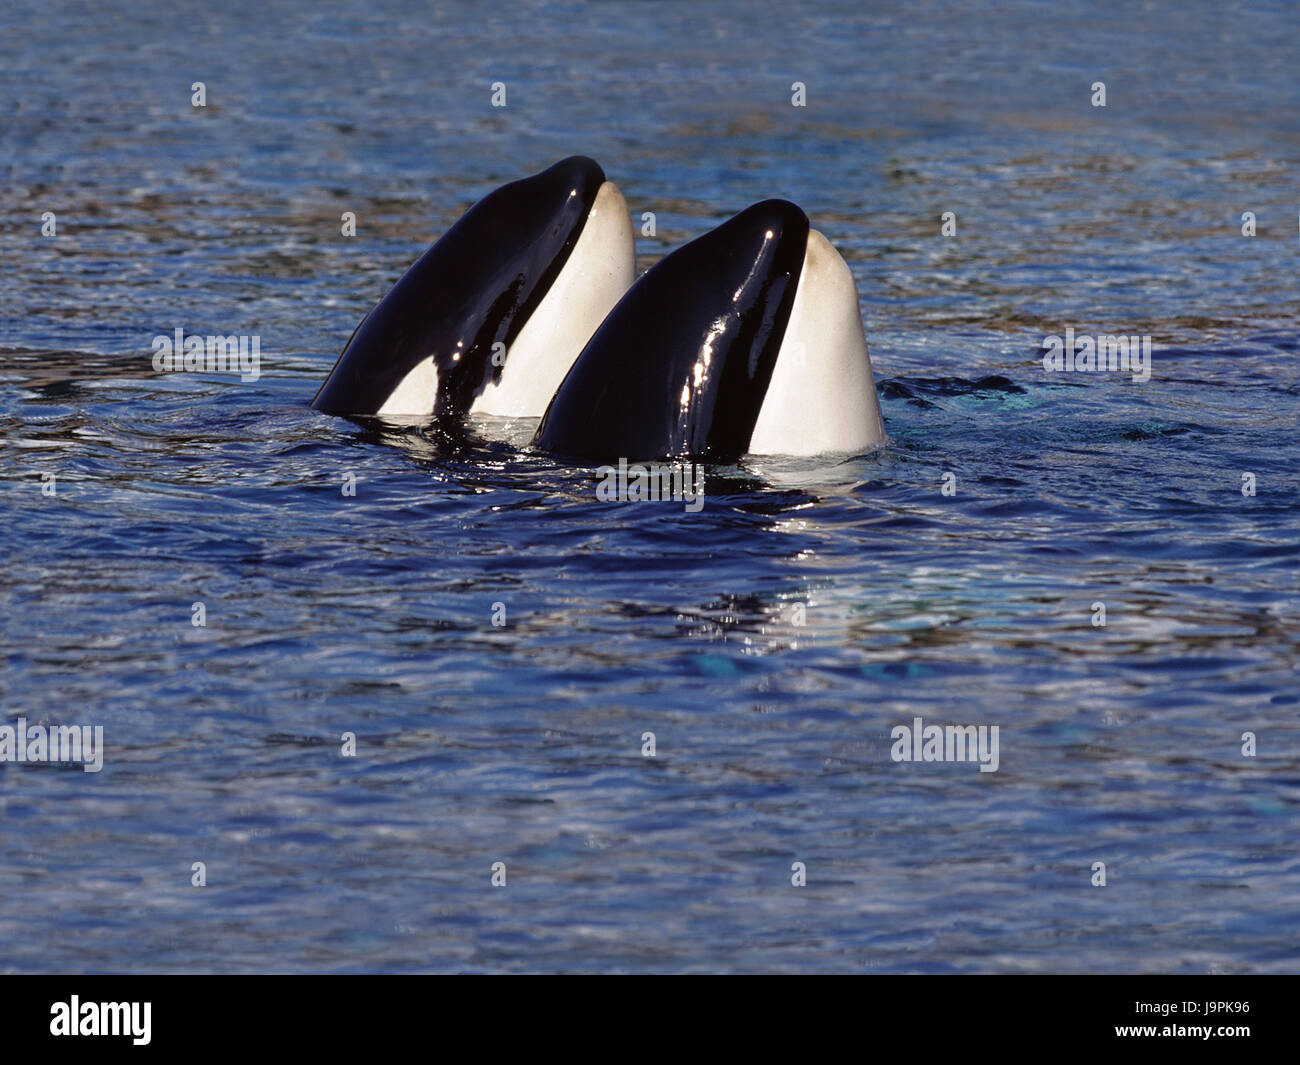 Killer whales,Orcinus orca,sea,water surface,Canada, Stock Photo